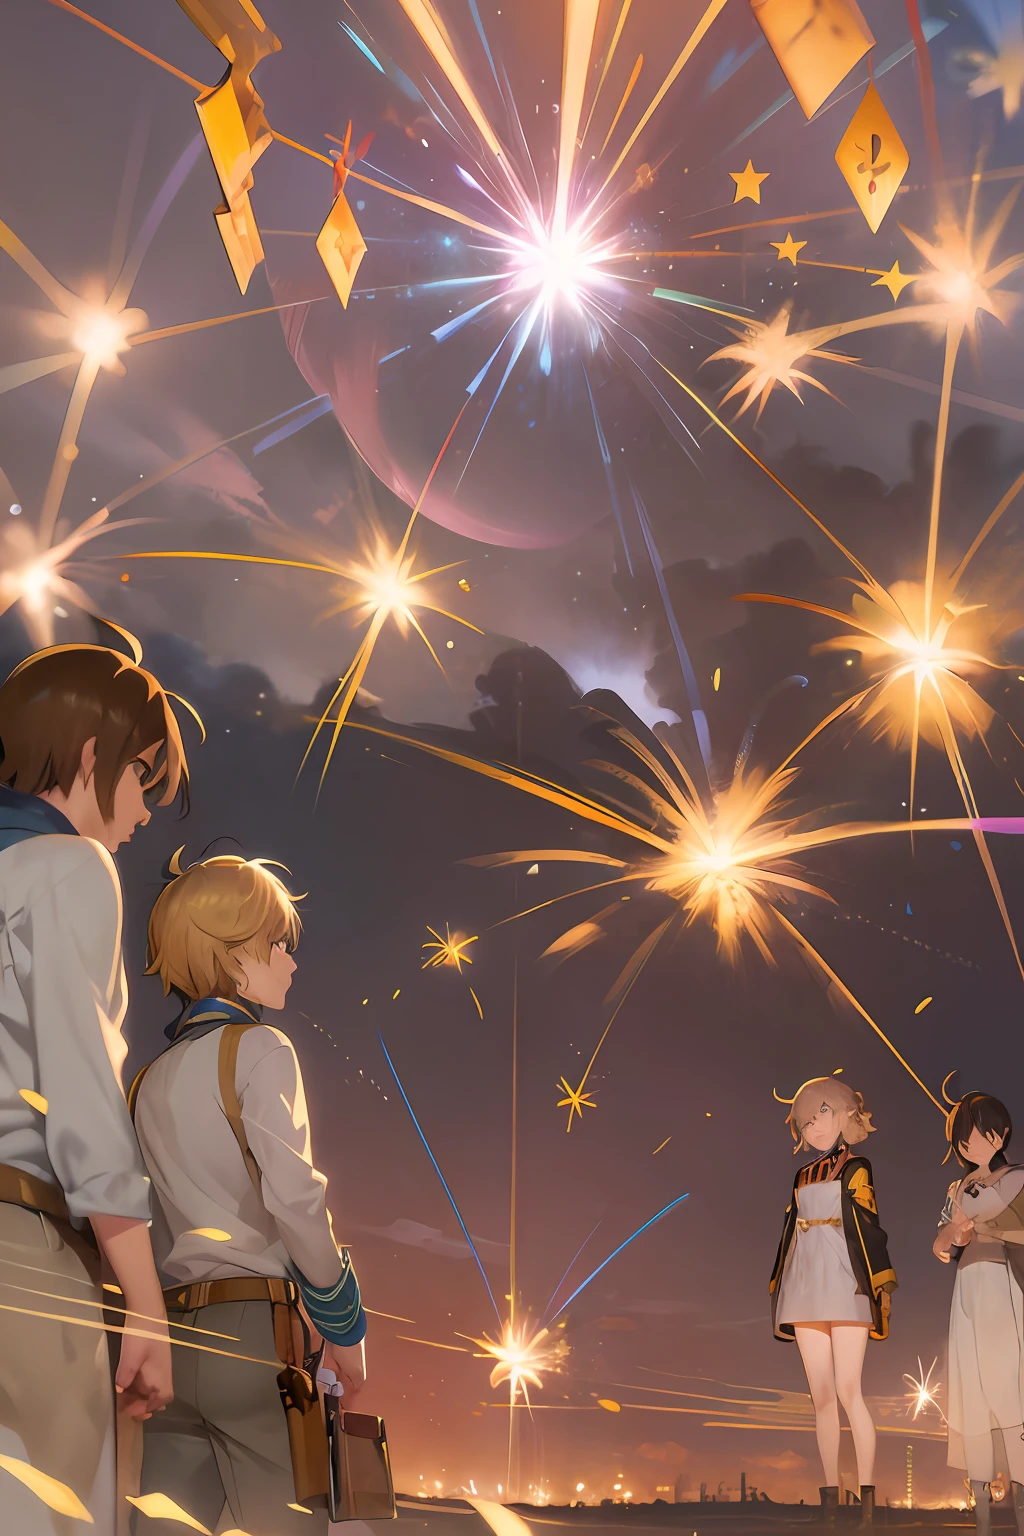 Anime character standing in a field with fireworks in the sky,Smiling children [ Fireworks in the sky ]!!, Nostalgic and fantastic, guweiz and makoto shinkai, makoto shinkai and bioware, concept art magical highlight, makoto shinkai art style, anime movie screenshot, Fireworks, official artwork, anime key visual concept art of,